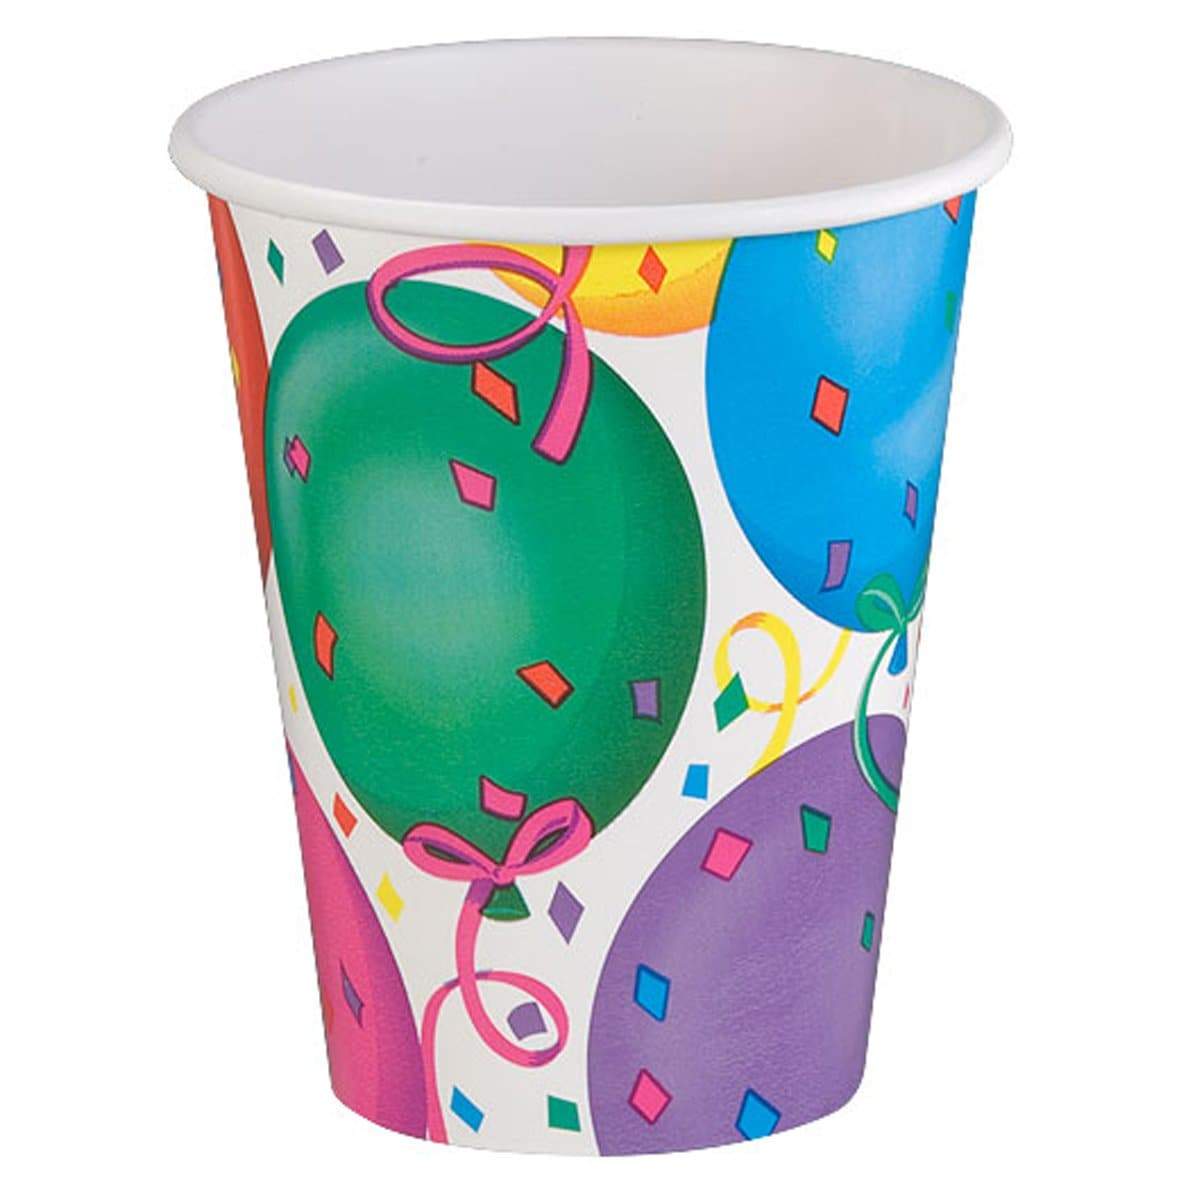 SALE Paper Cups Healy's Balloons Hot Cold 9 oz 12 count Paper Cups Hanna K   